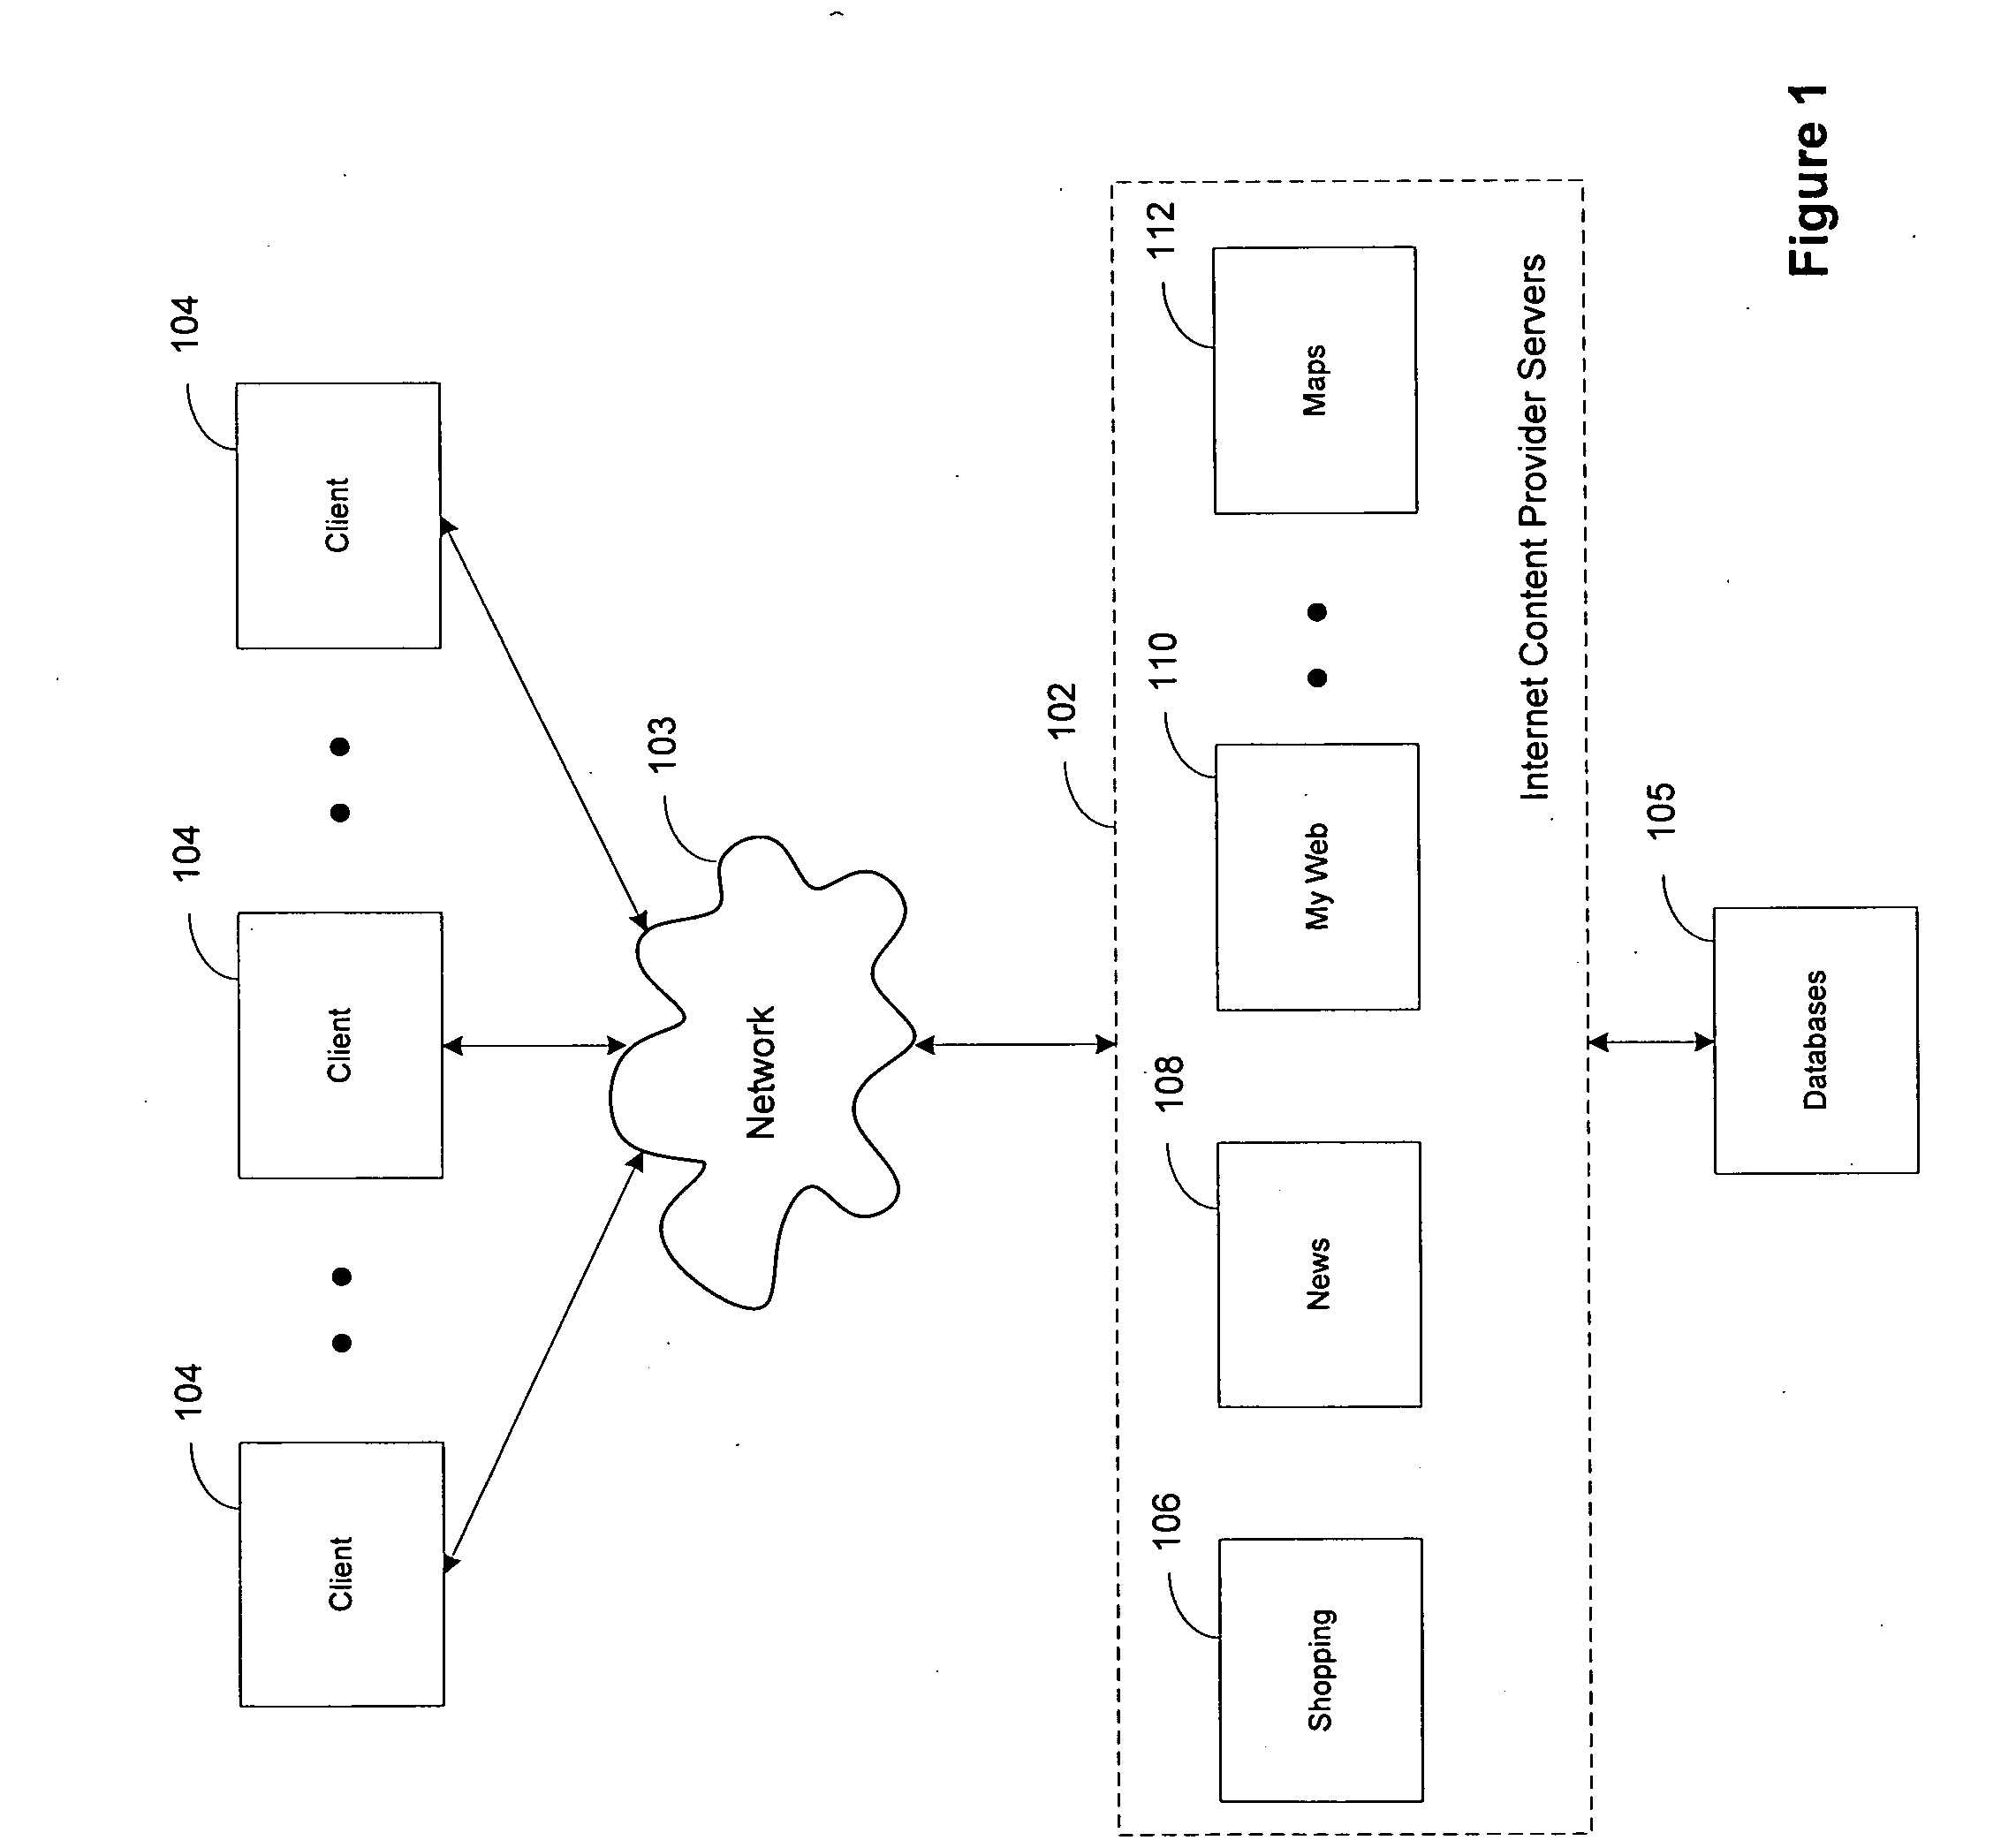 Method and system for presenting information with multiple views